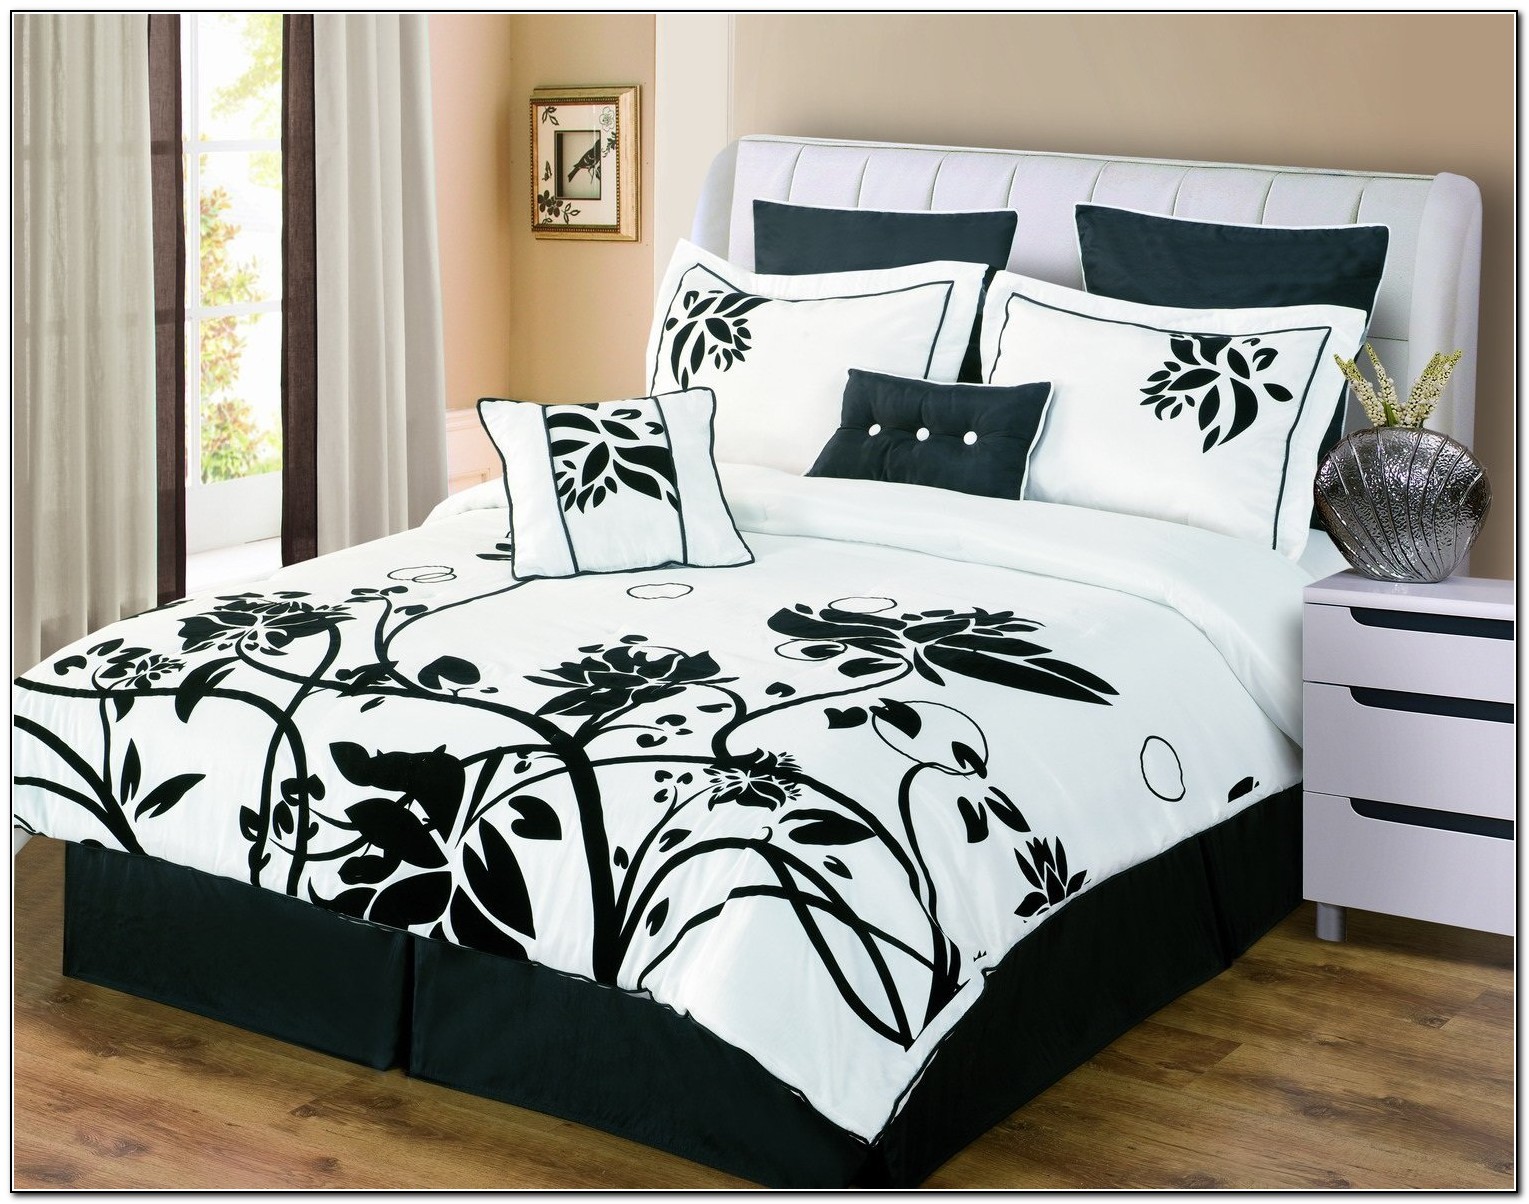 Black And White Bed Sets For Girls